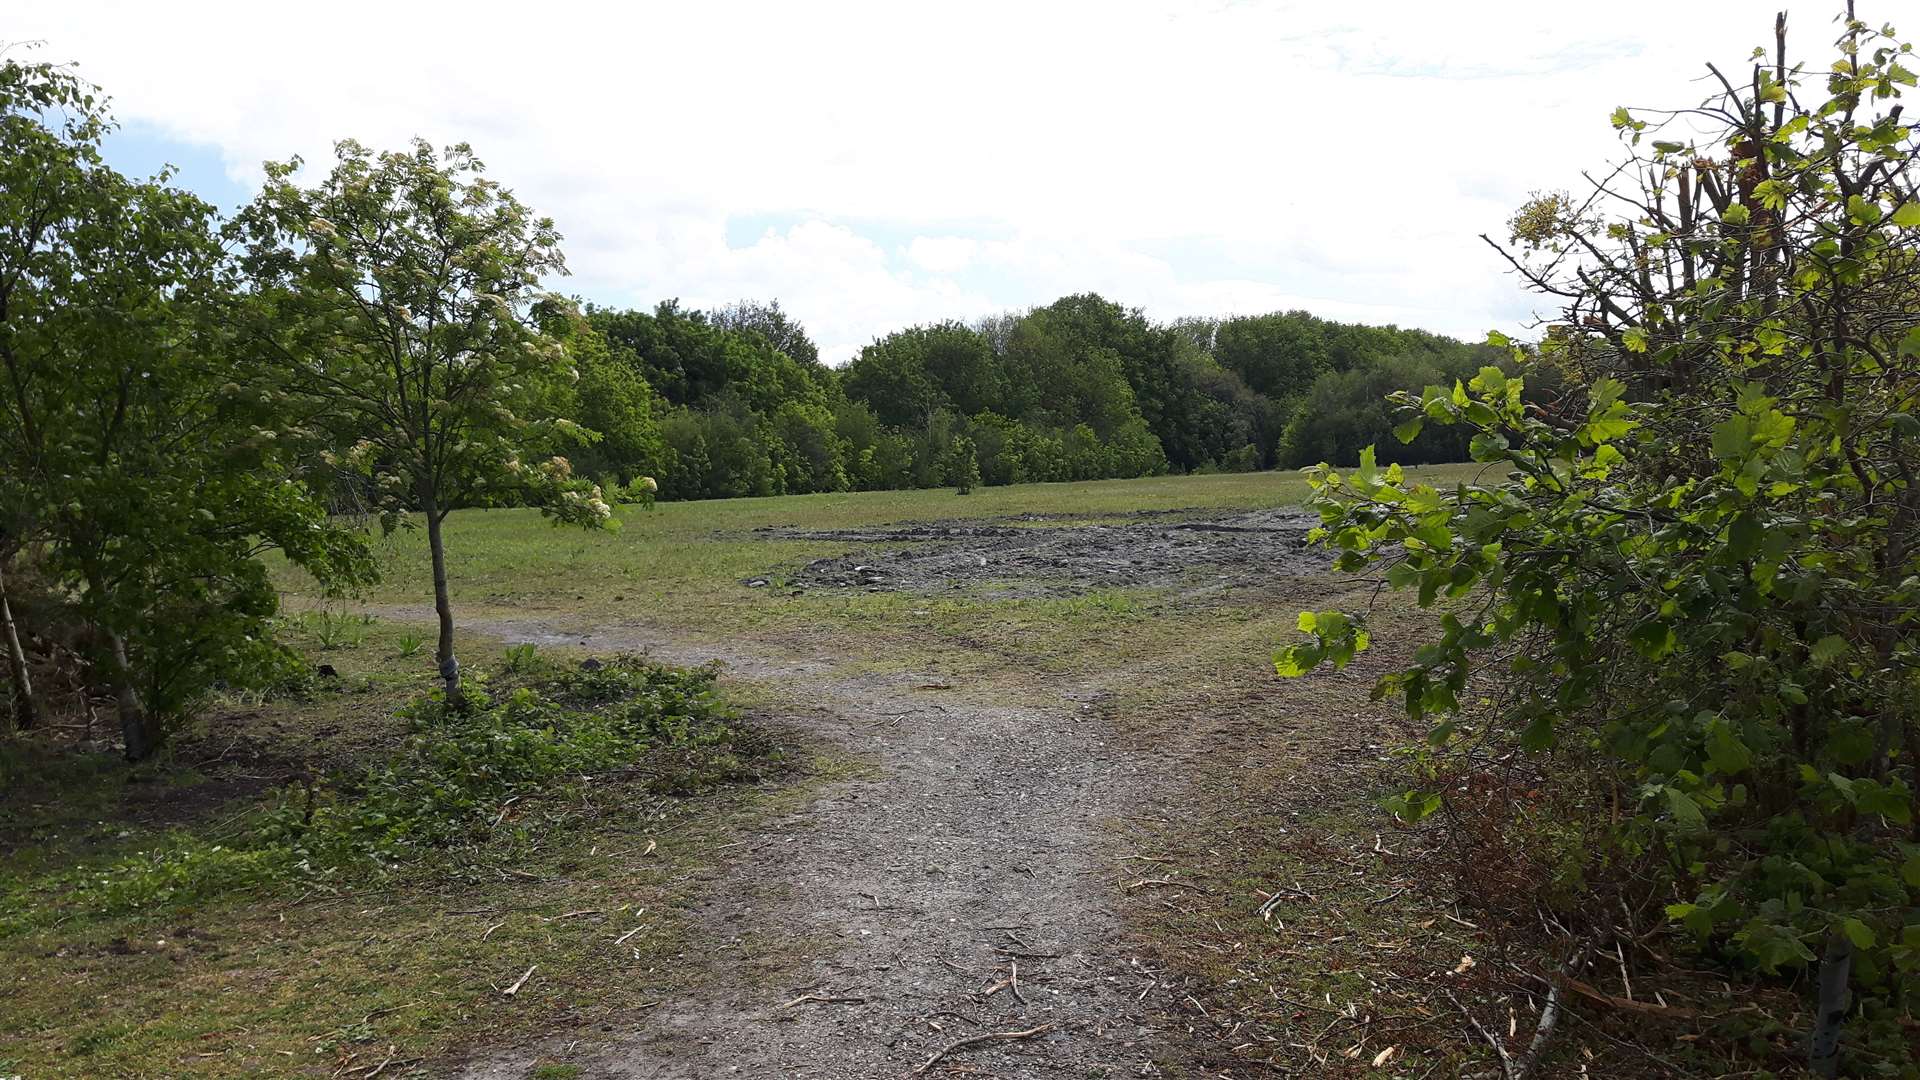 The site where Quinn Estates plan to build 210 new and self build homes at Betteshanger beside Colliers Way